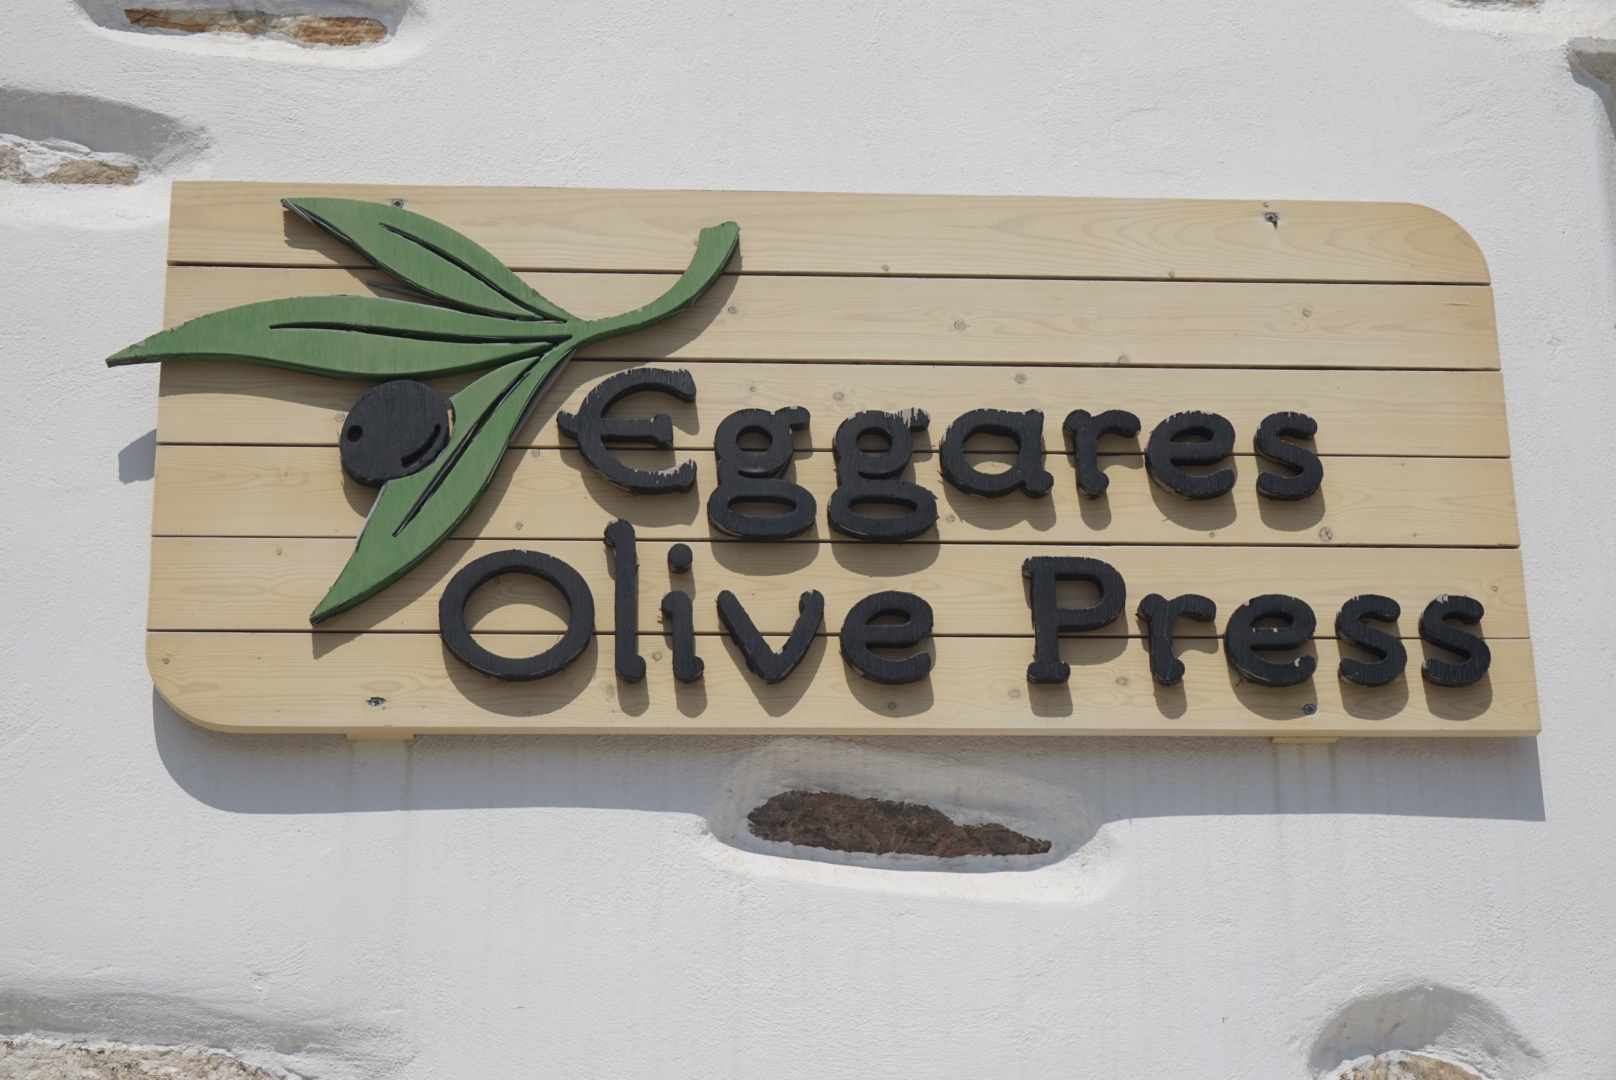 Naxos Eggares olive Press museum